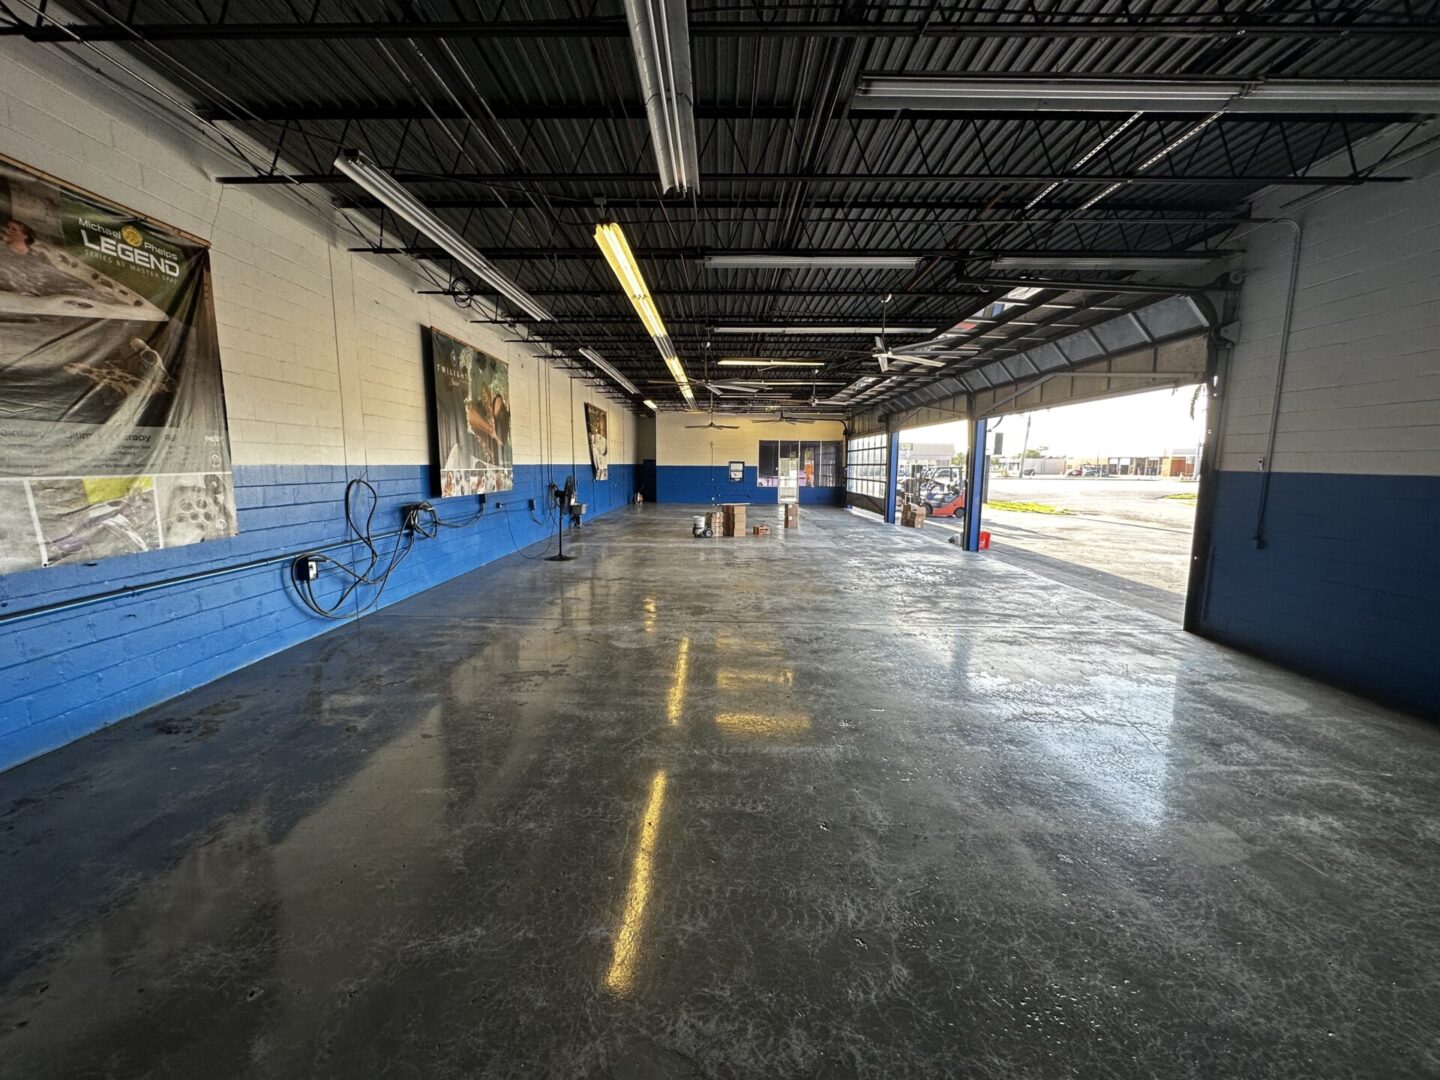 A large empty parking garage with blue walls.